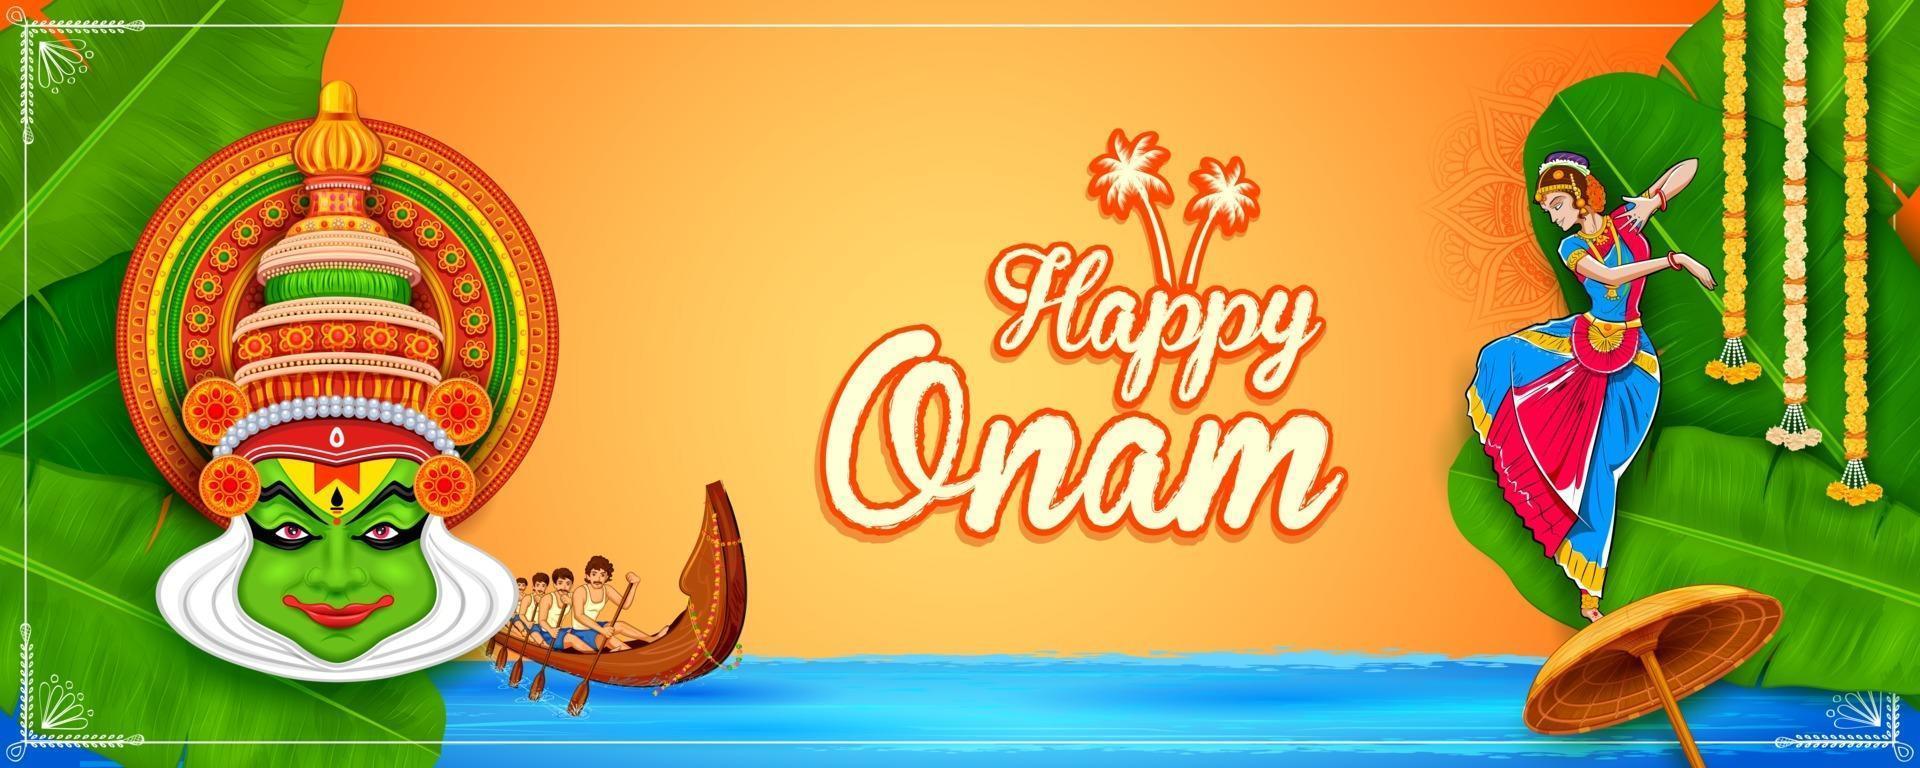 Onam background traditional festival of South India vector